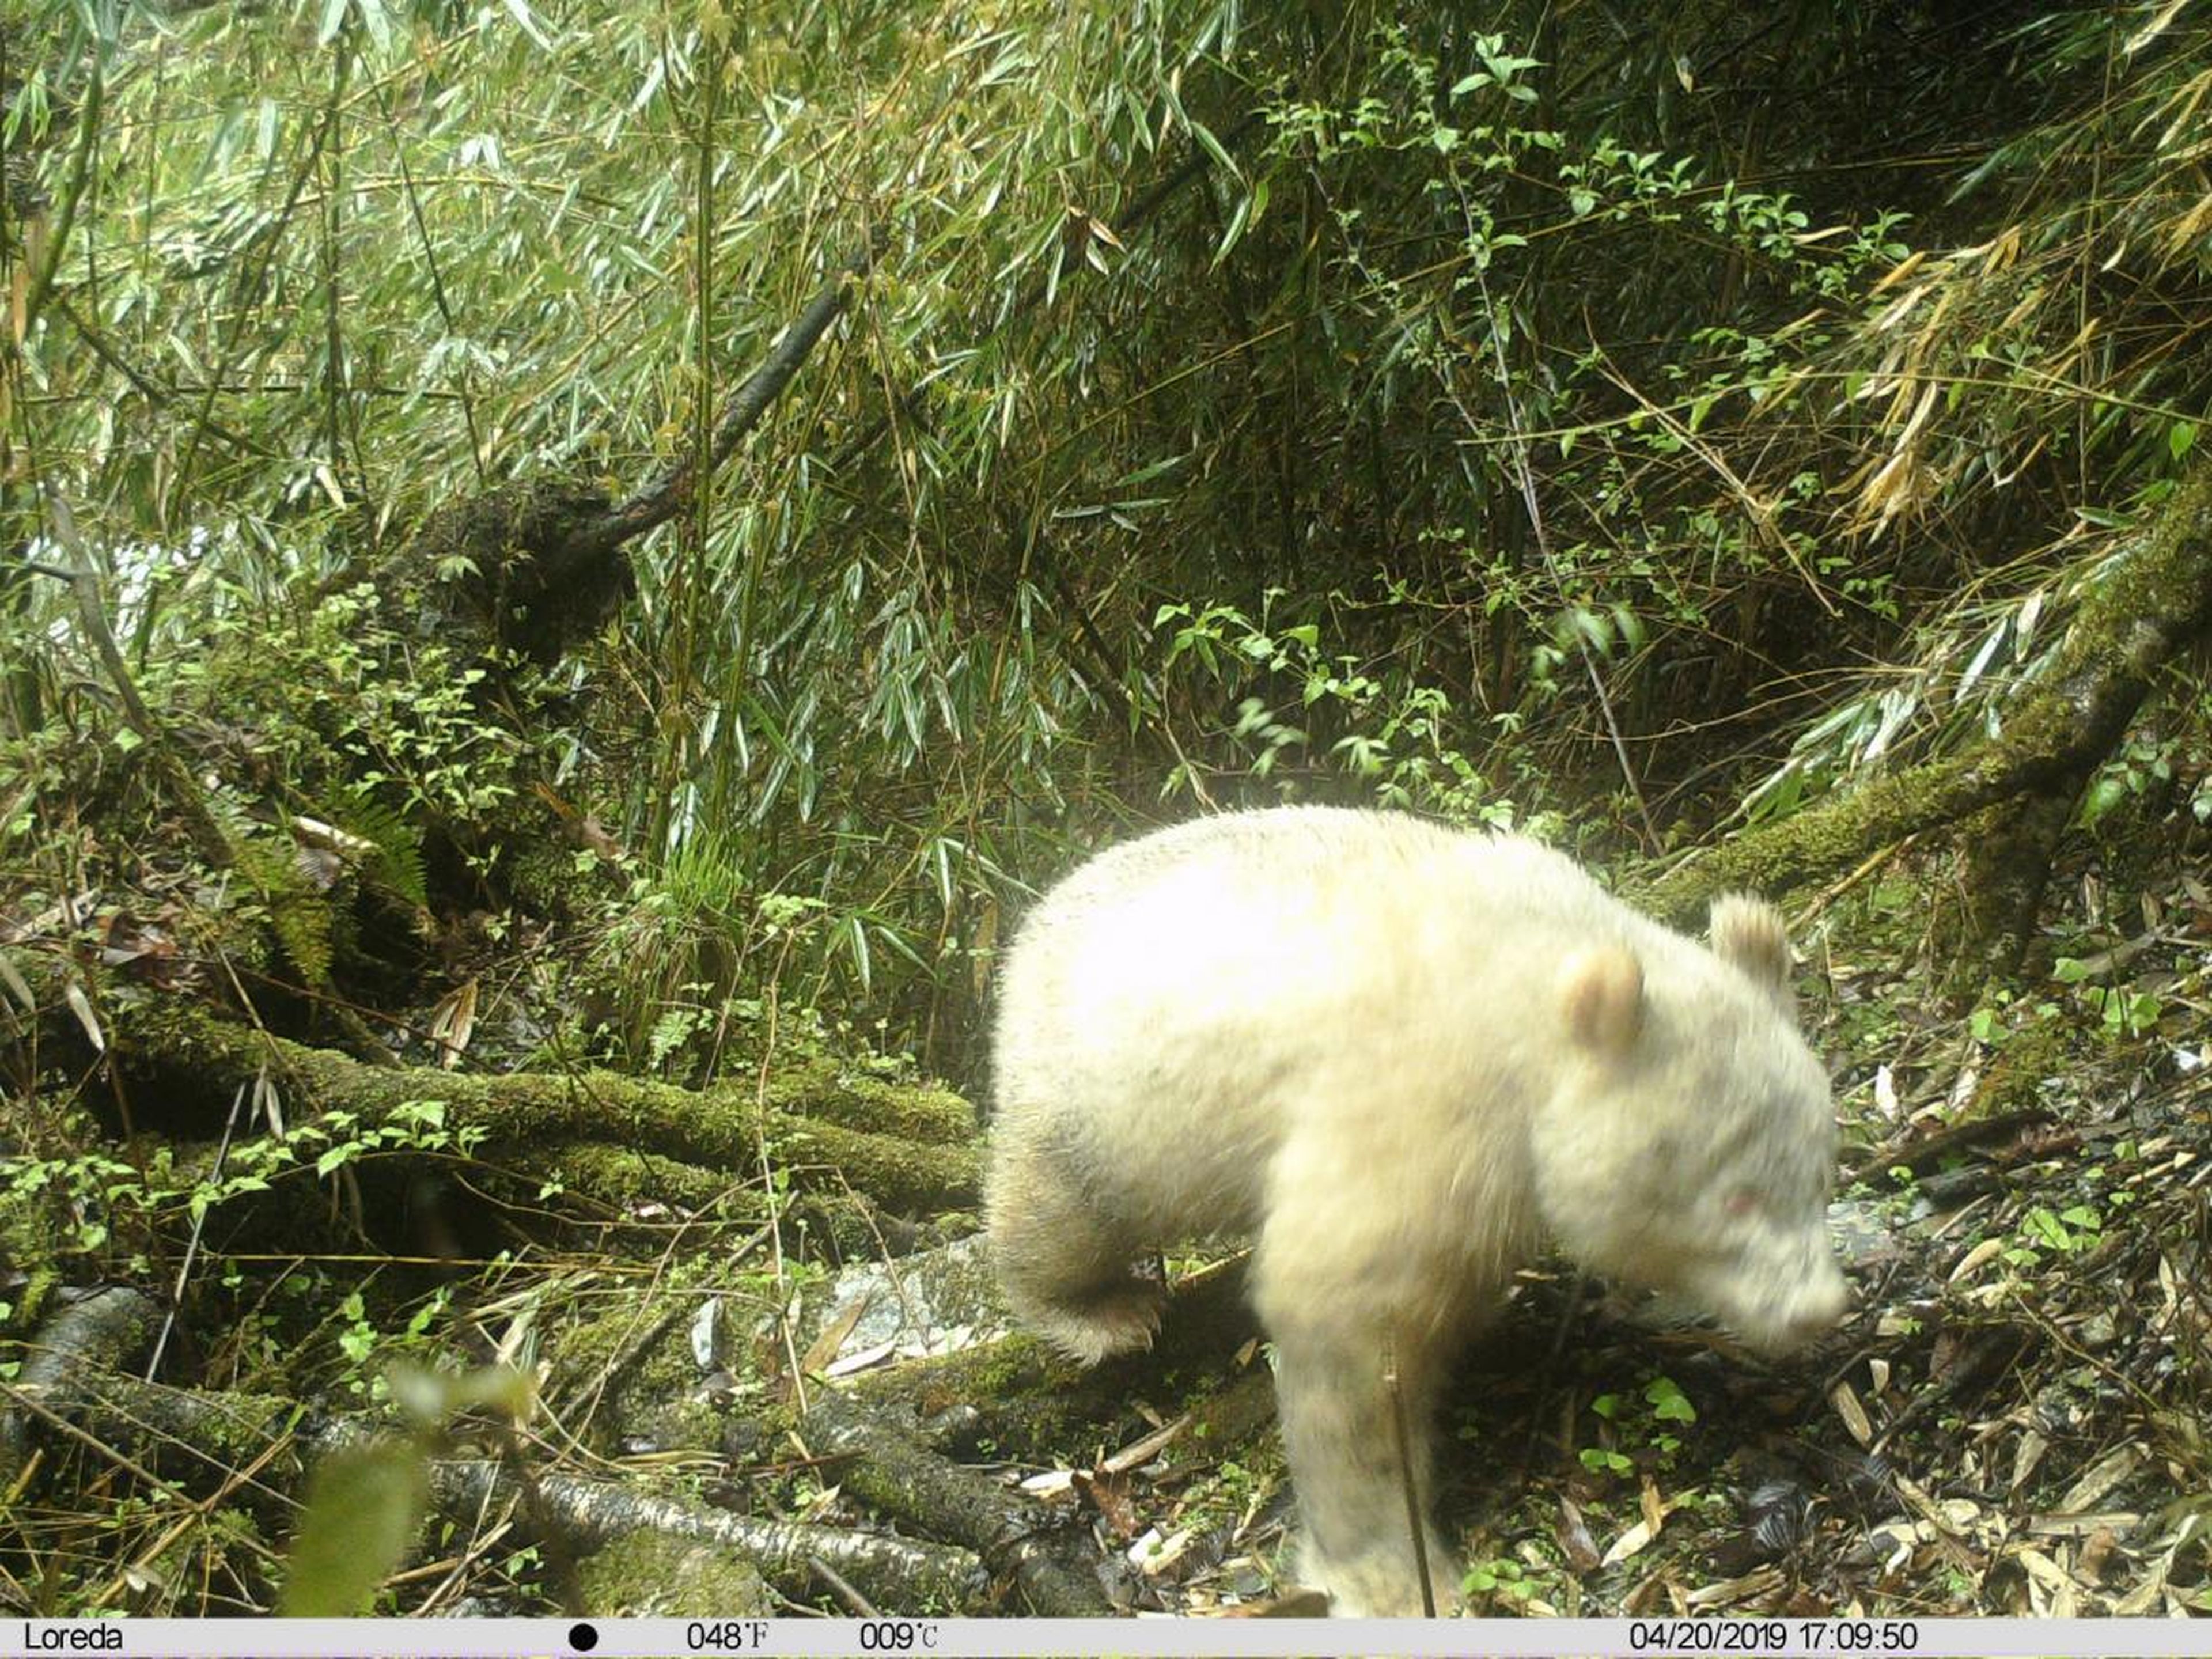 The first ever documented photo of a fully white giant panda.